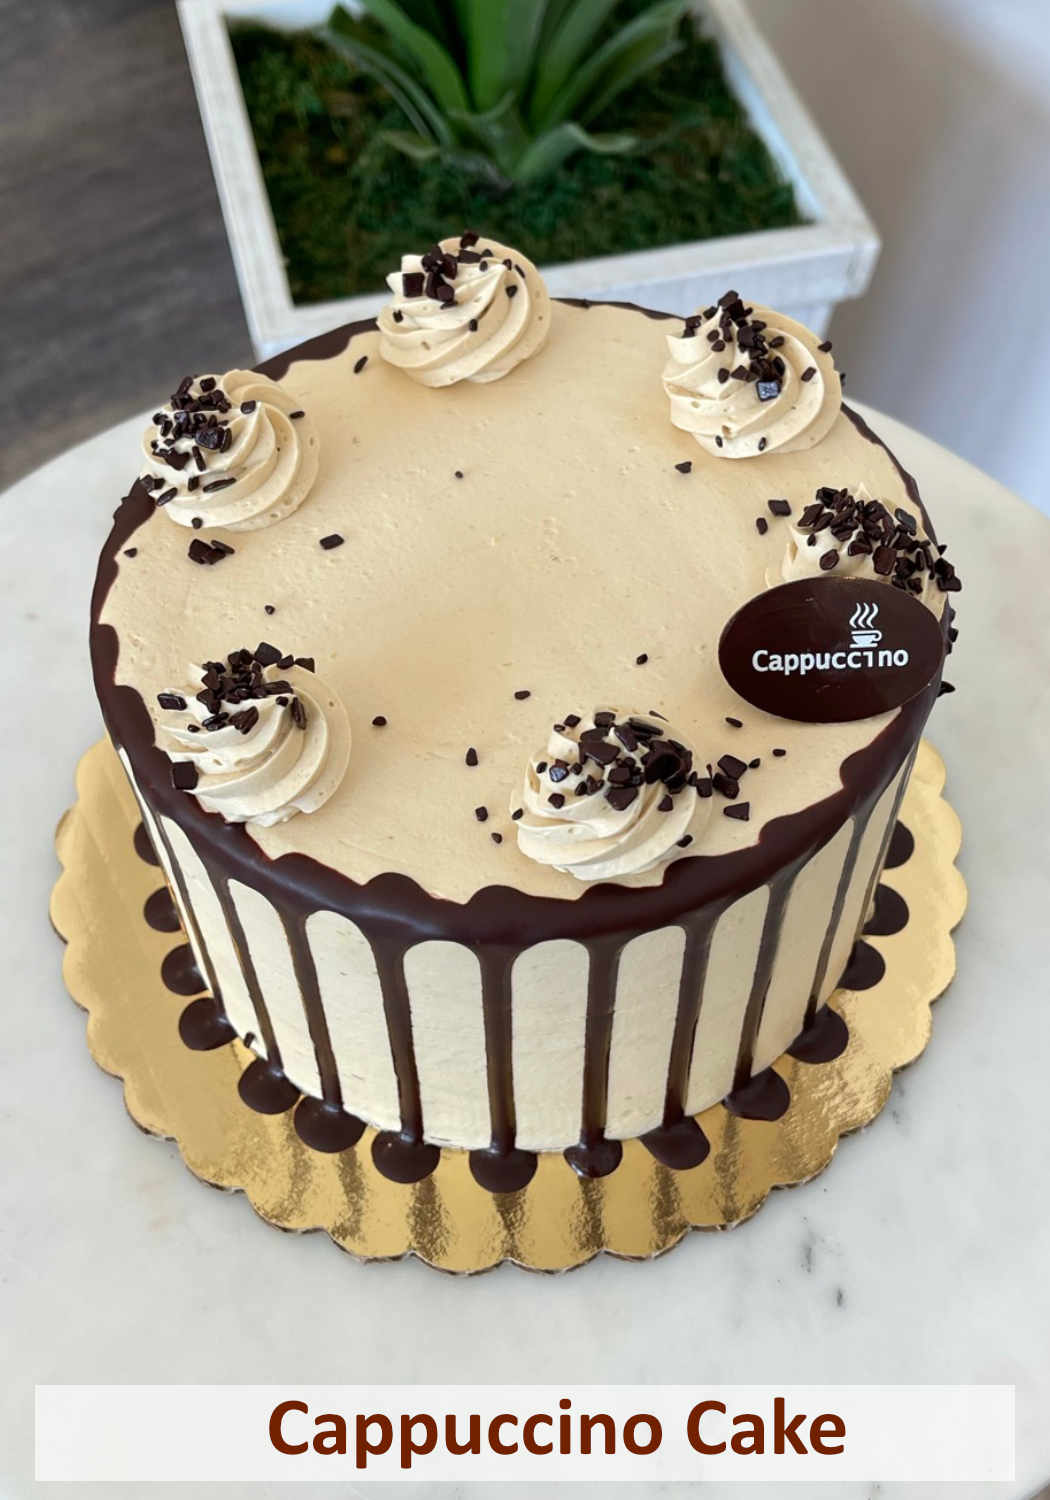 Delicious Occasion Cakes, Available for Home Delivery | Lola's Cupcakes